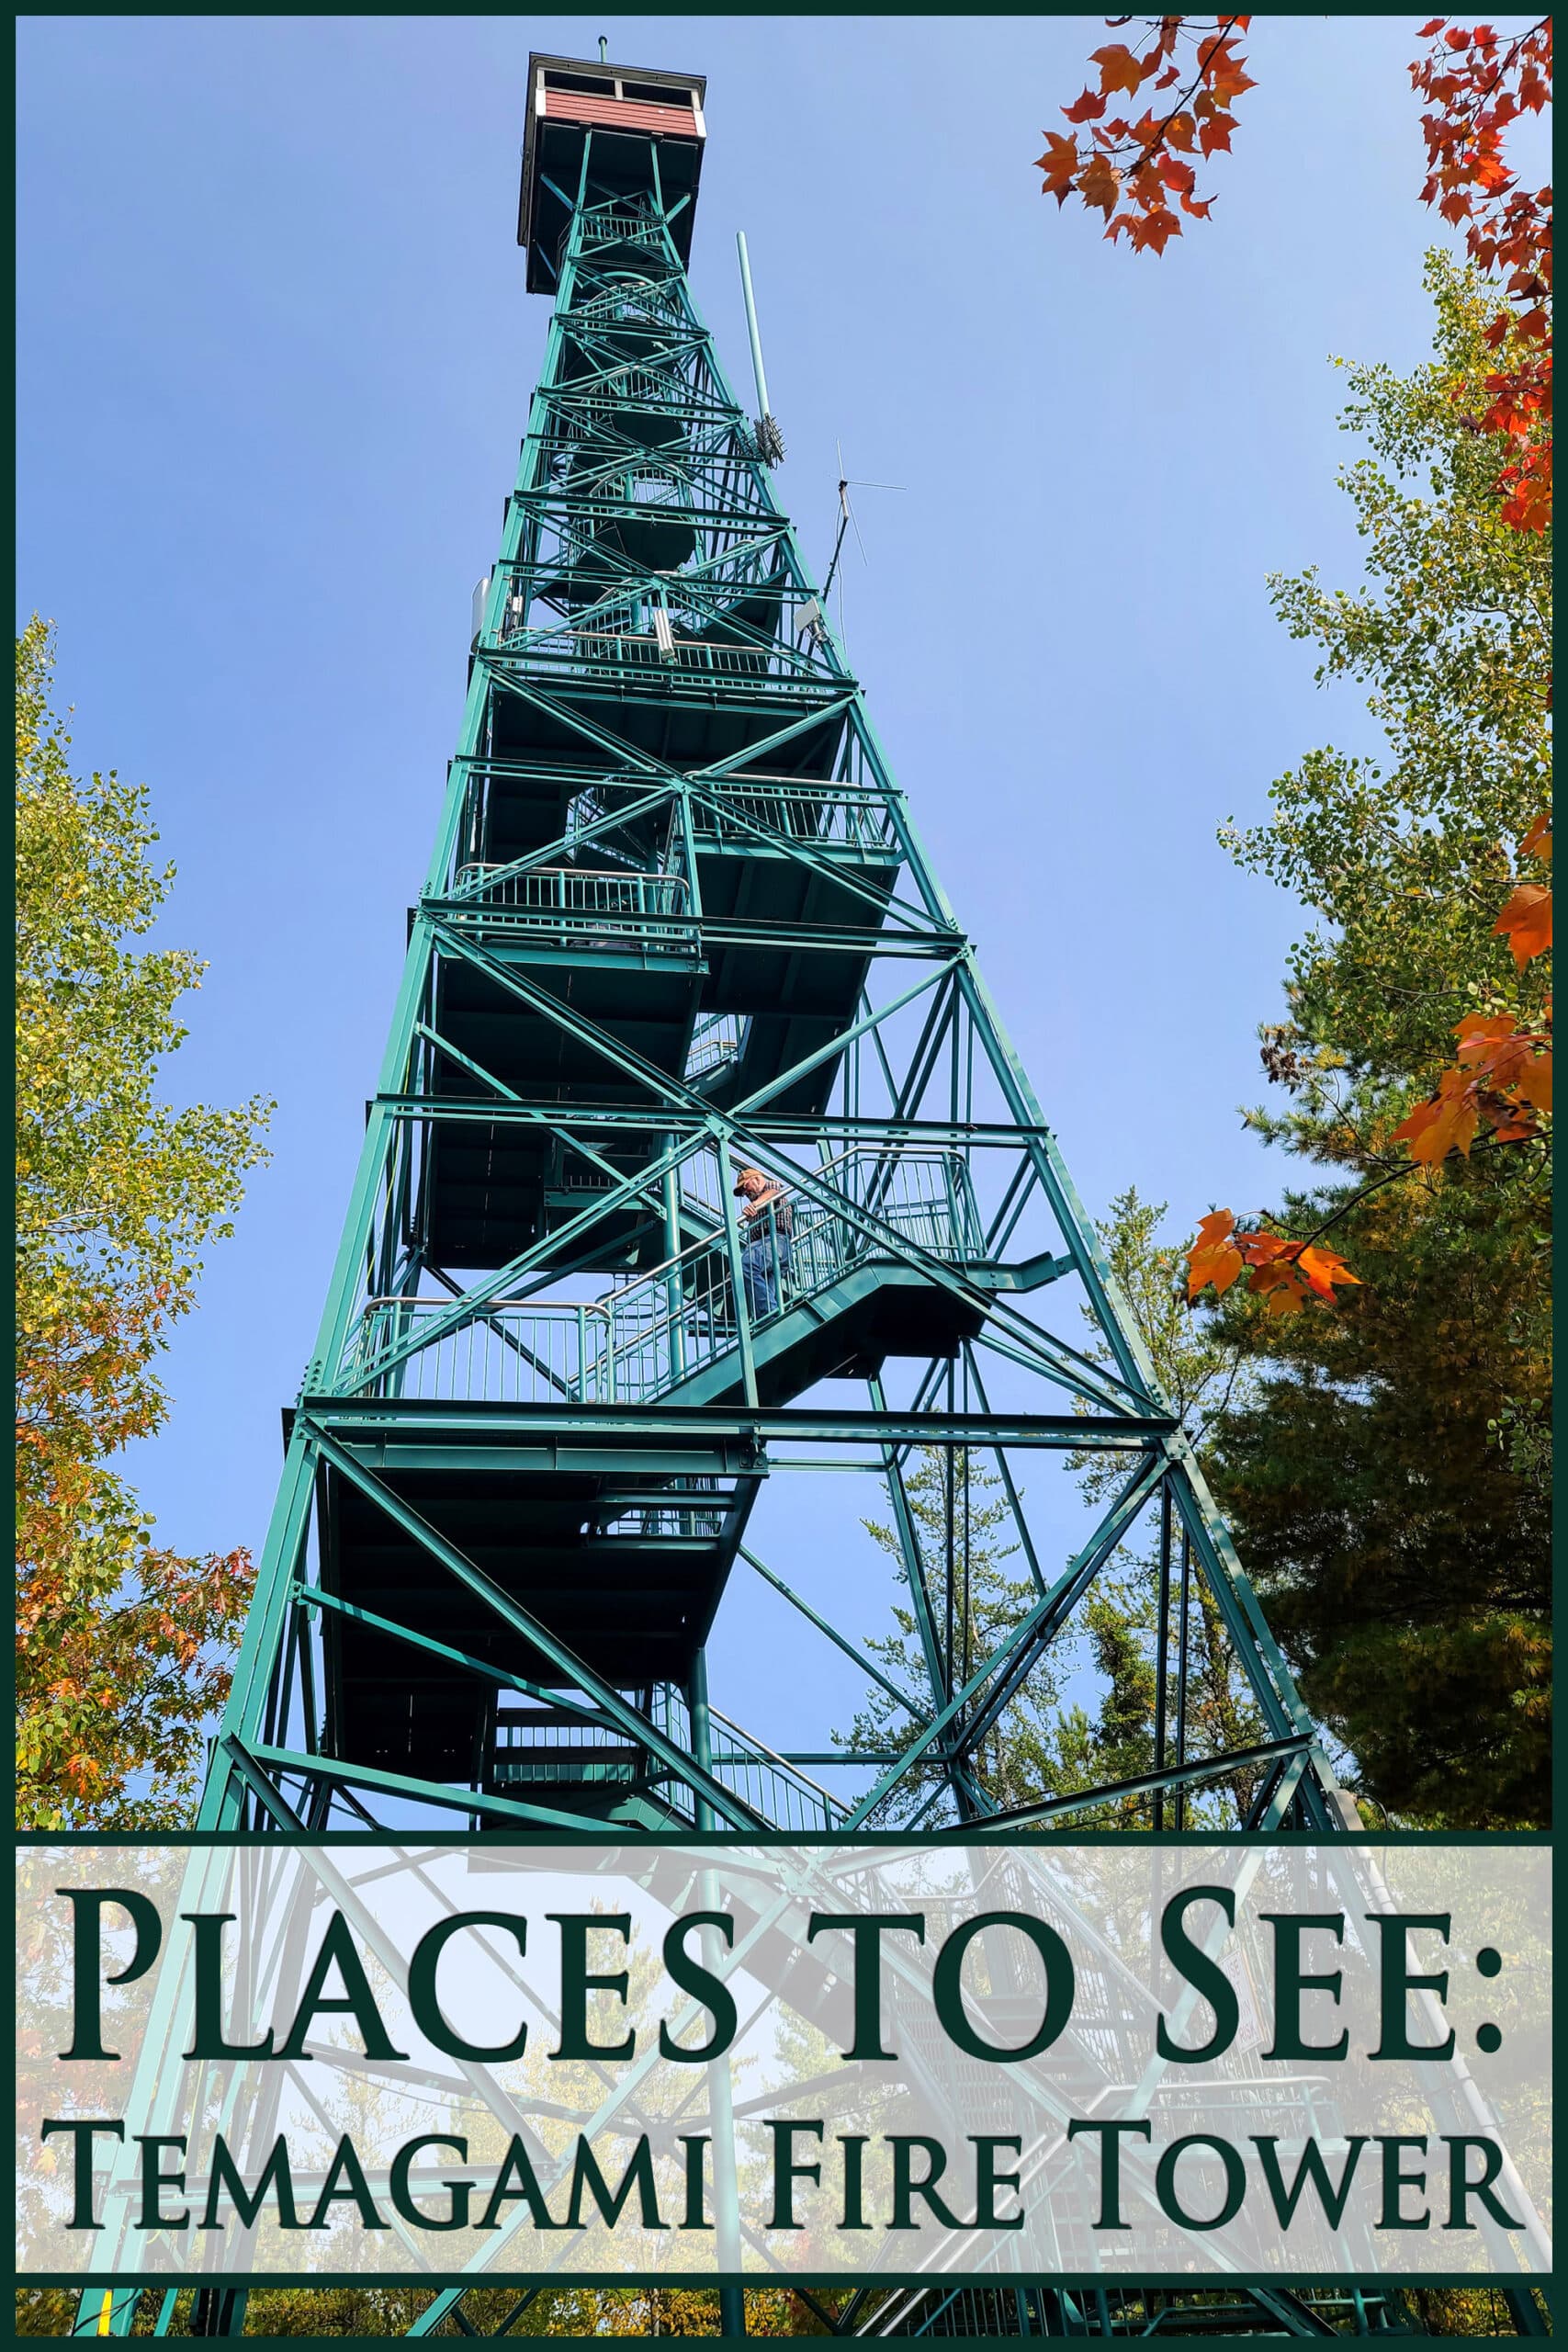 A teal coloured metal tower. Overlaid text says places to see the temagami fire tower.